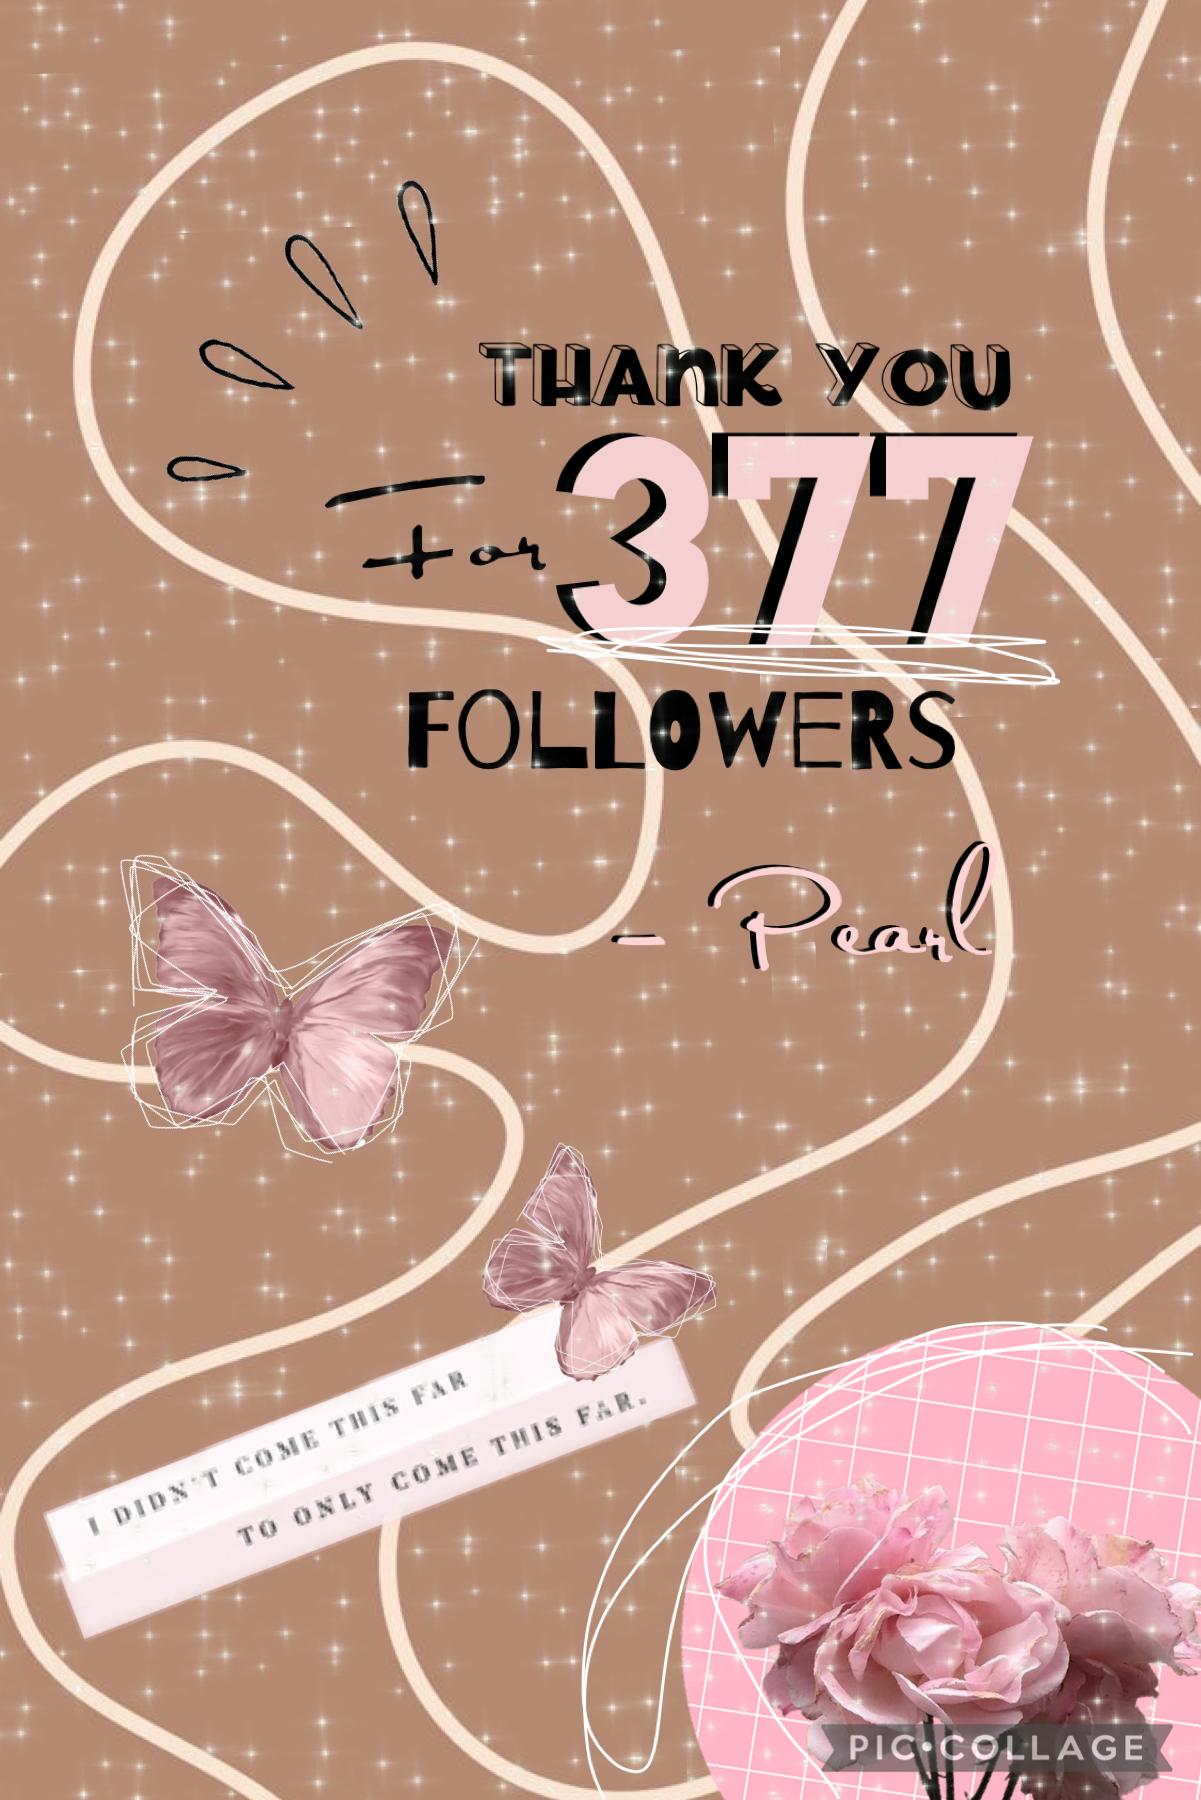 🎀tap🎀
Thanks for 377 followers guys!!! And more importantly thank you for all of the love and support!!! 🥳😊🌸
- Pearl